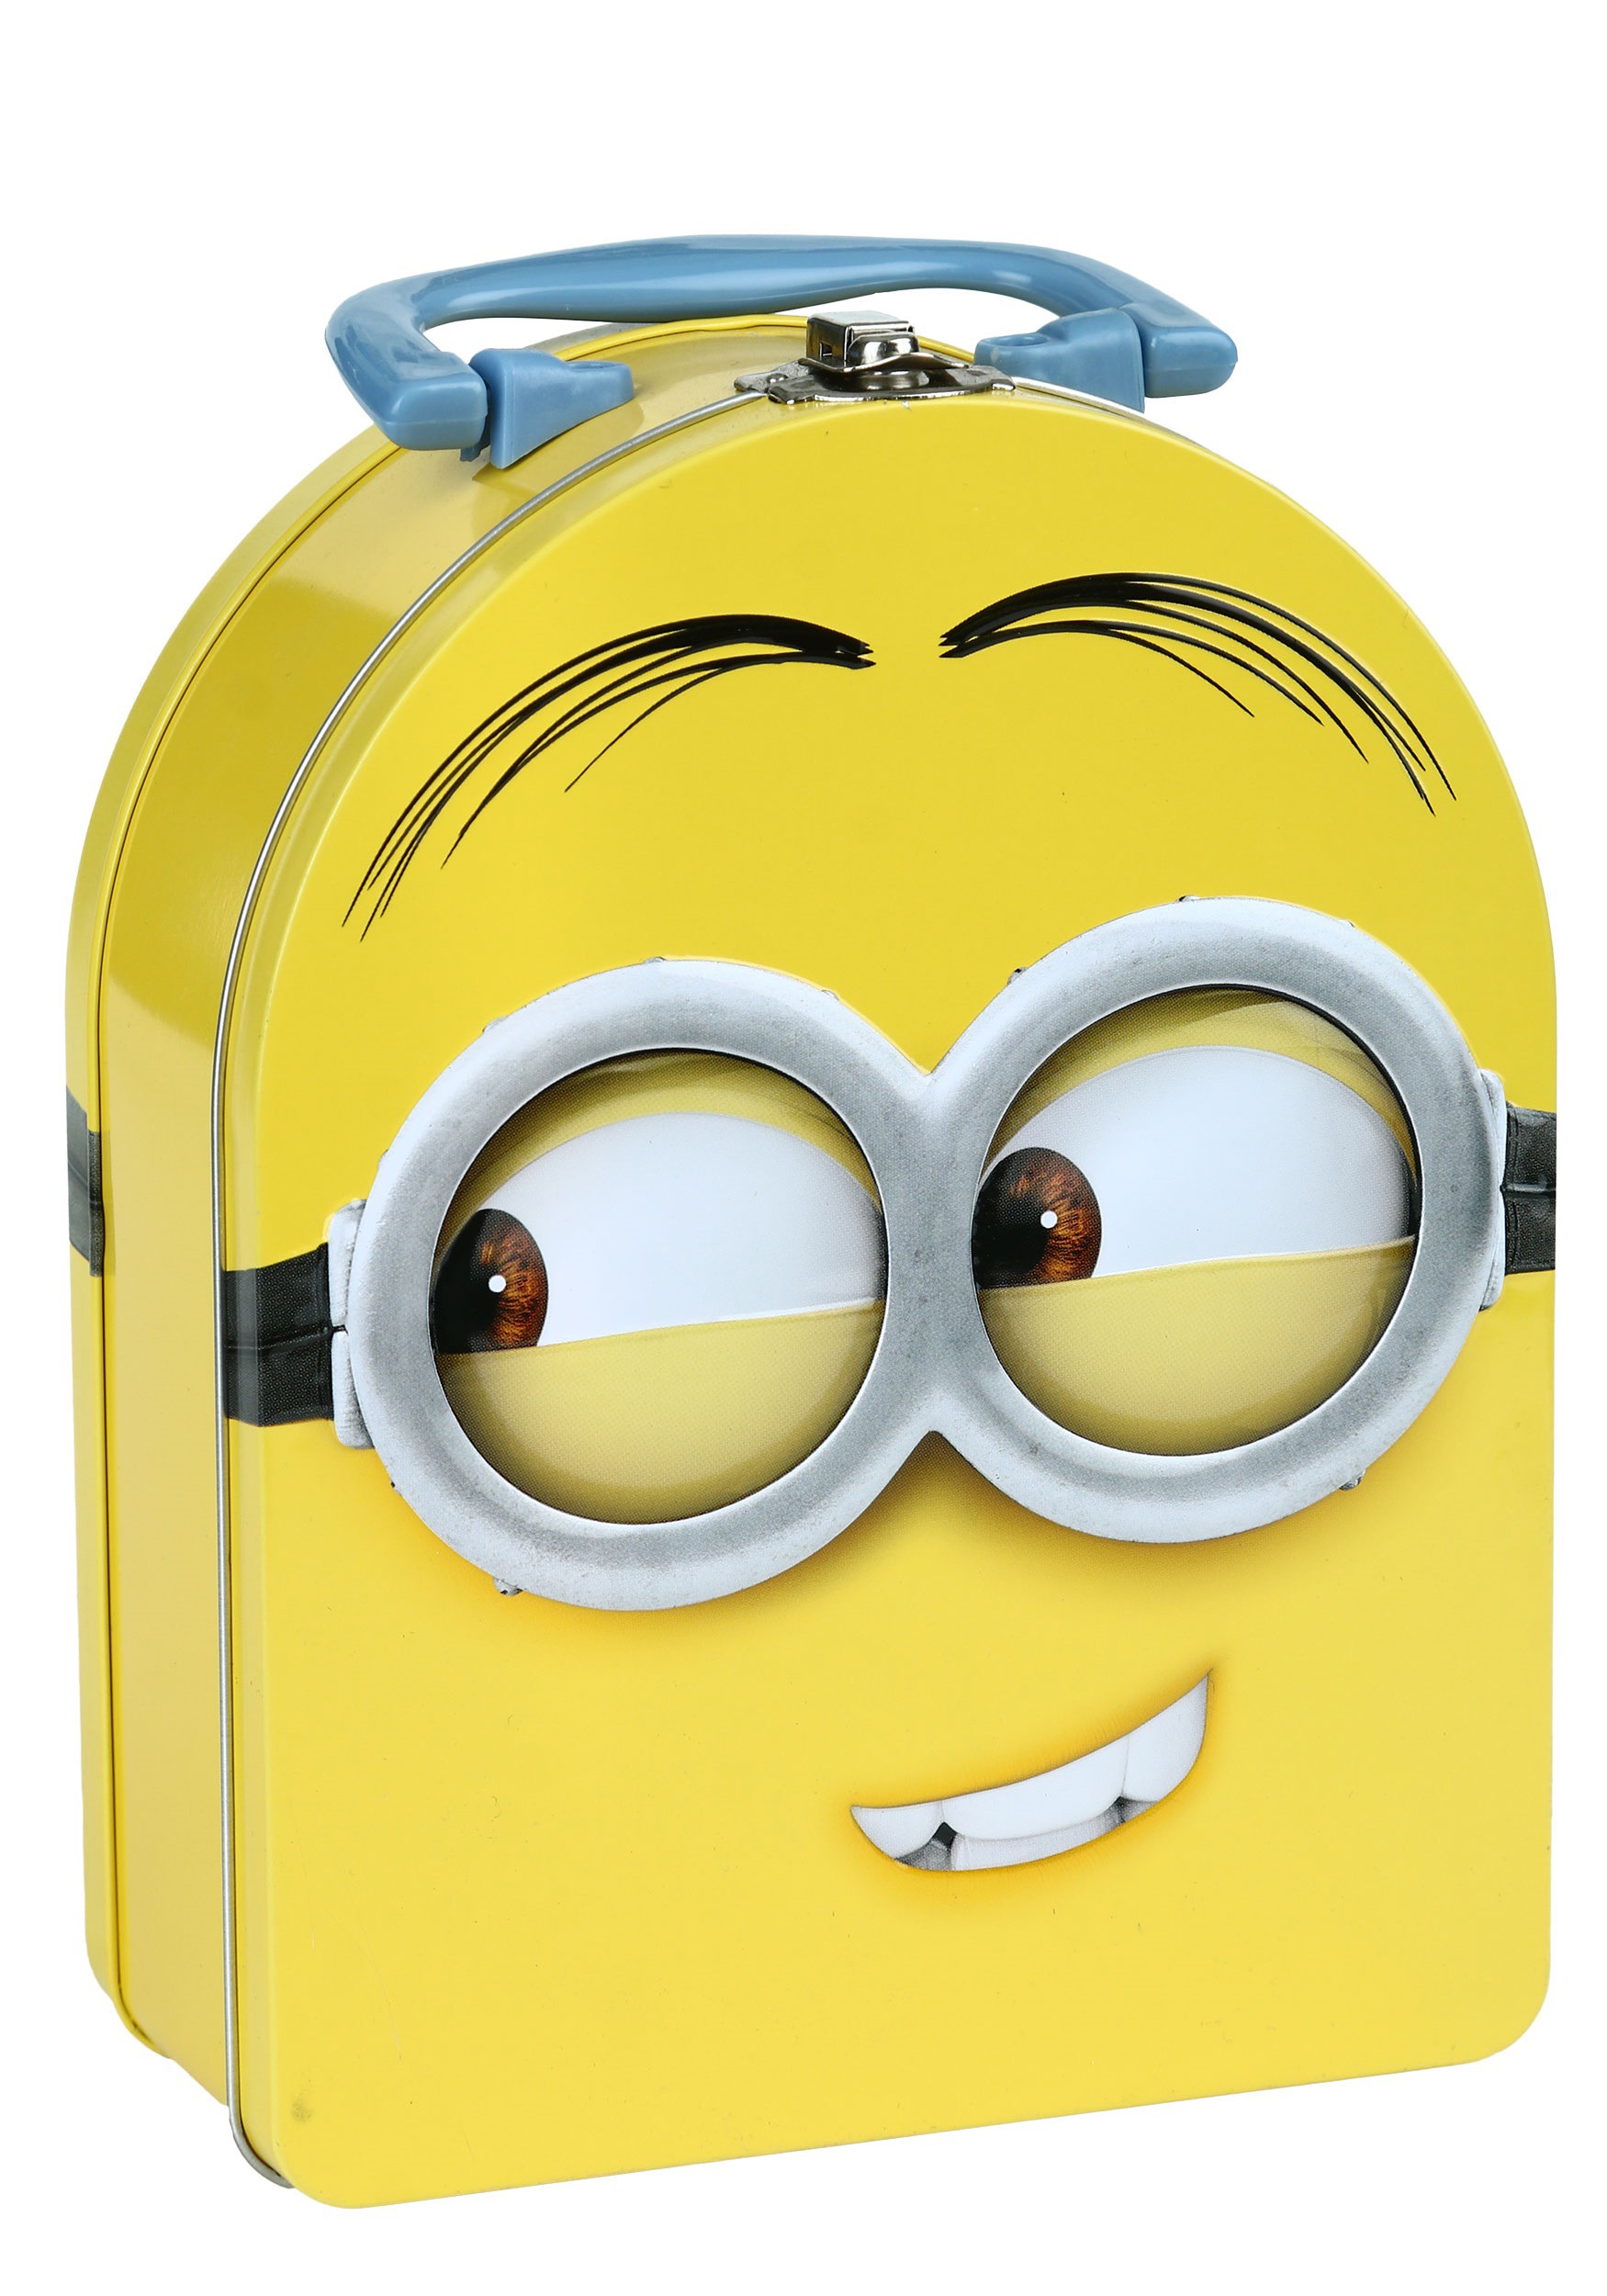 https://images.fun.com/products/30085/1-1/minions-side-looking-lunch-box.jpg